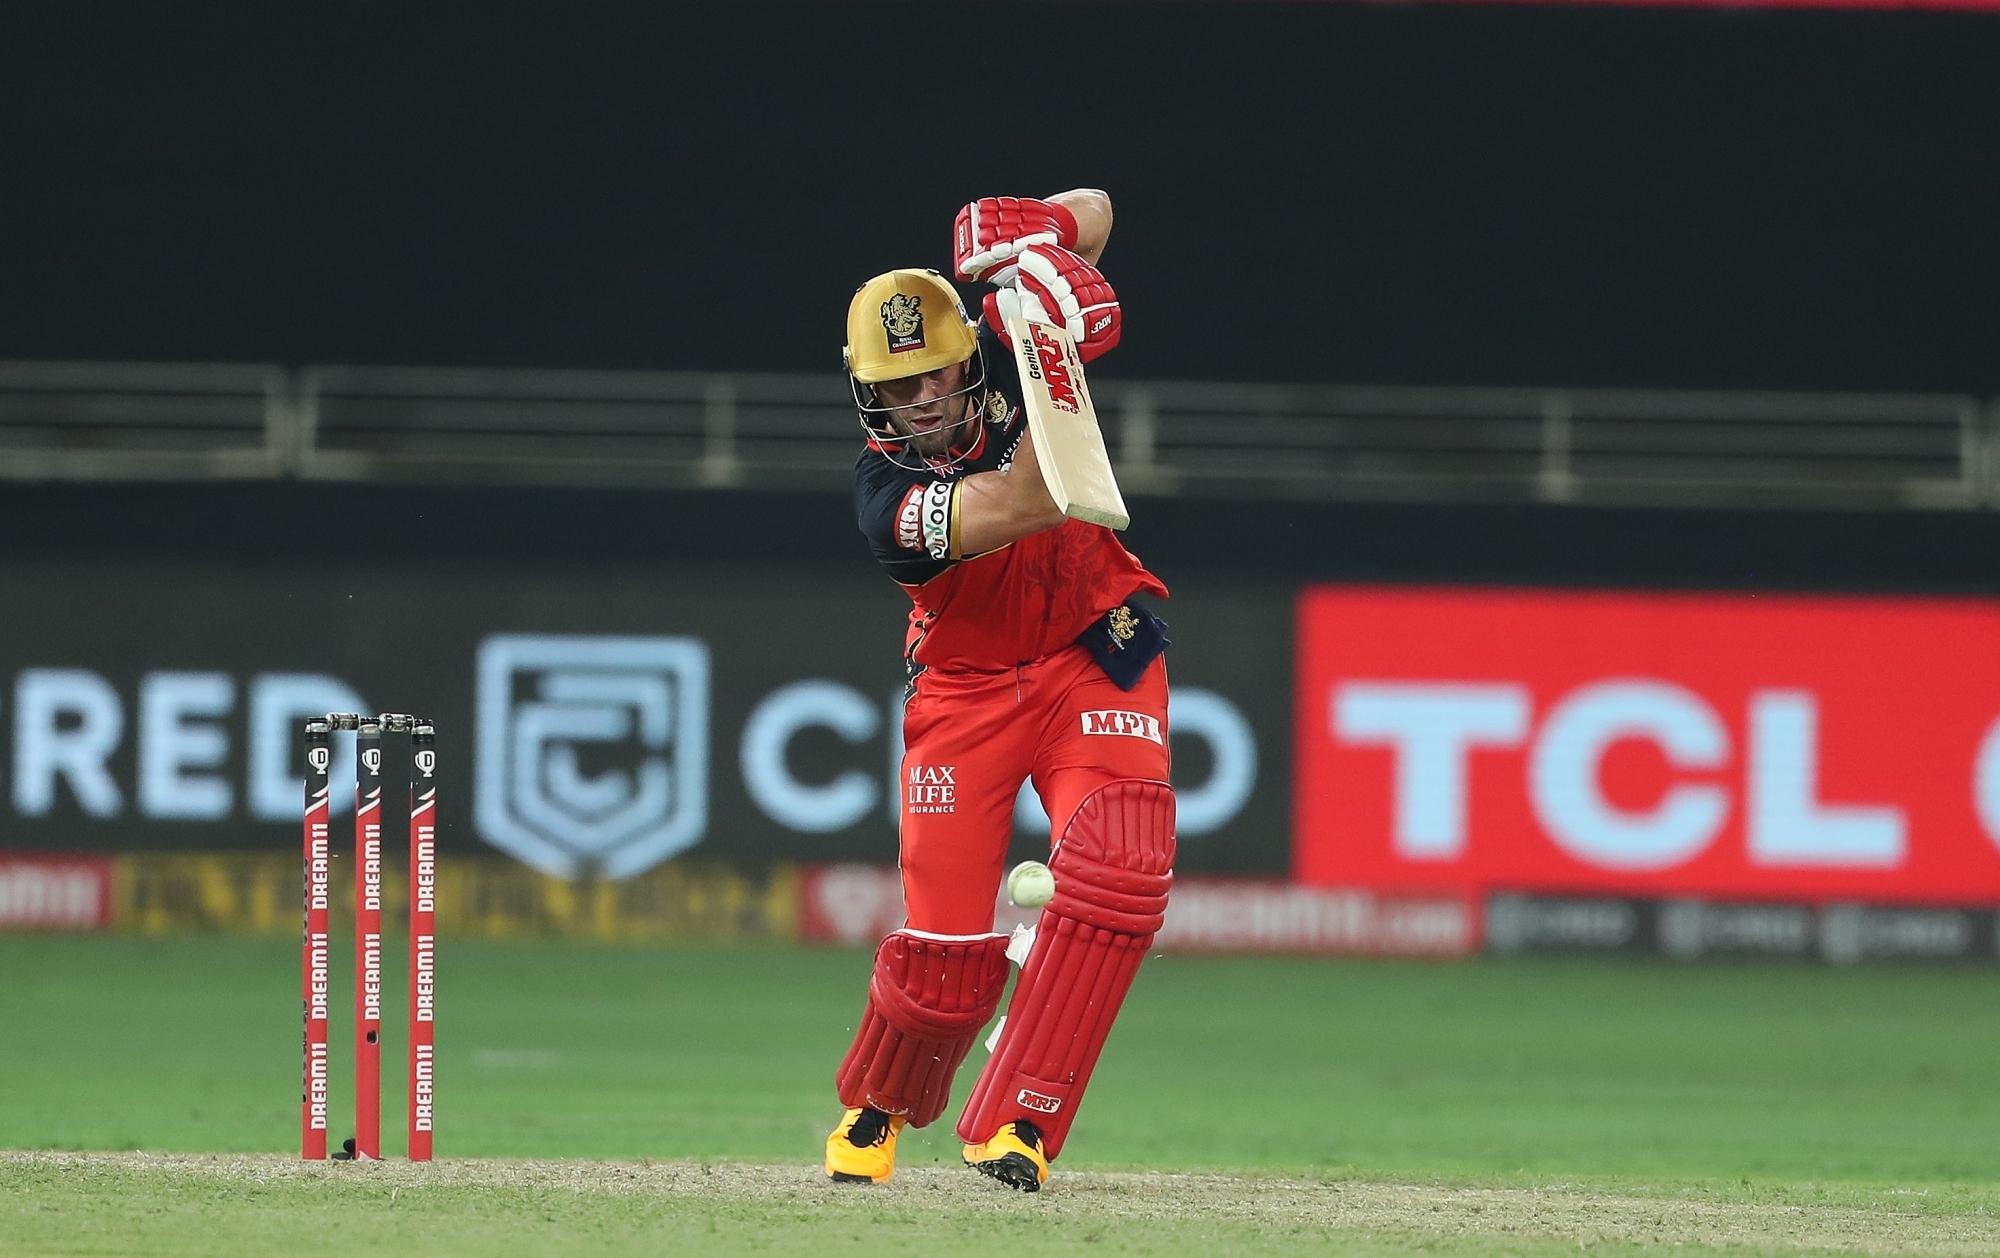 AB de Villiers is currently stealing the show in the IPL 2020 | BCCI/IPL